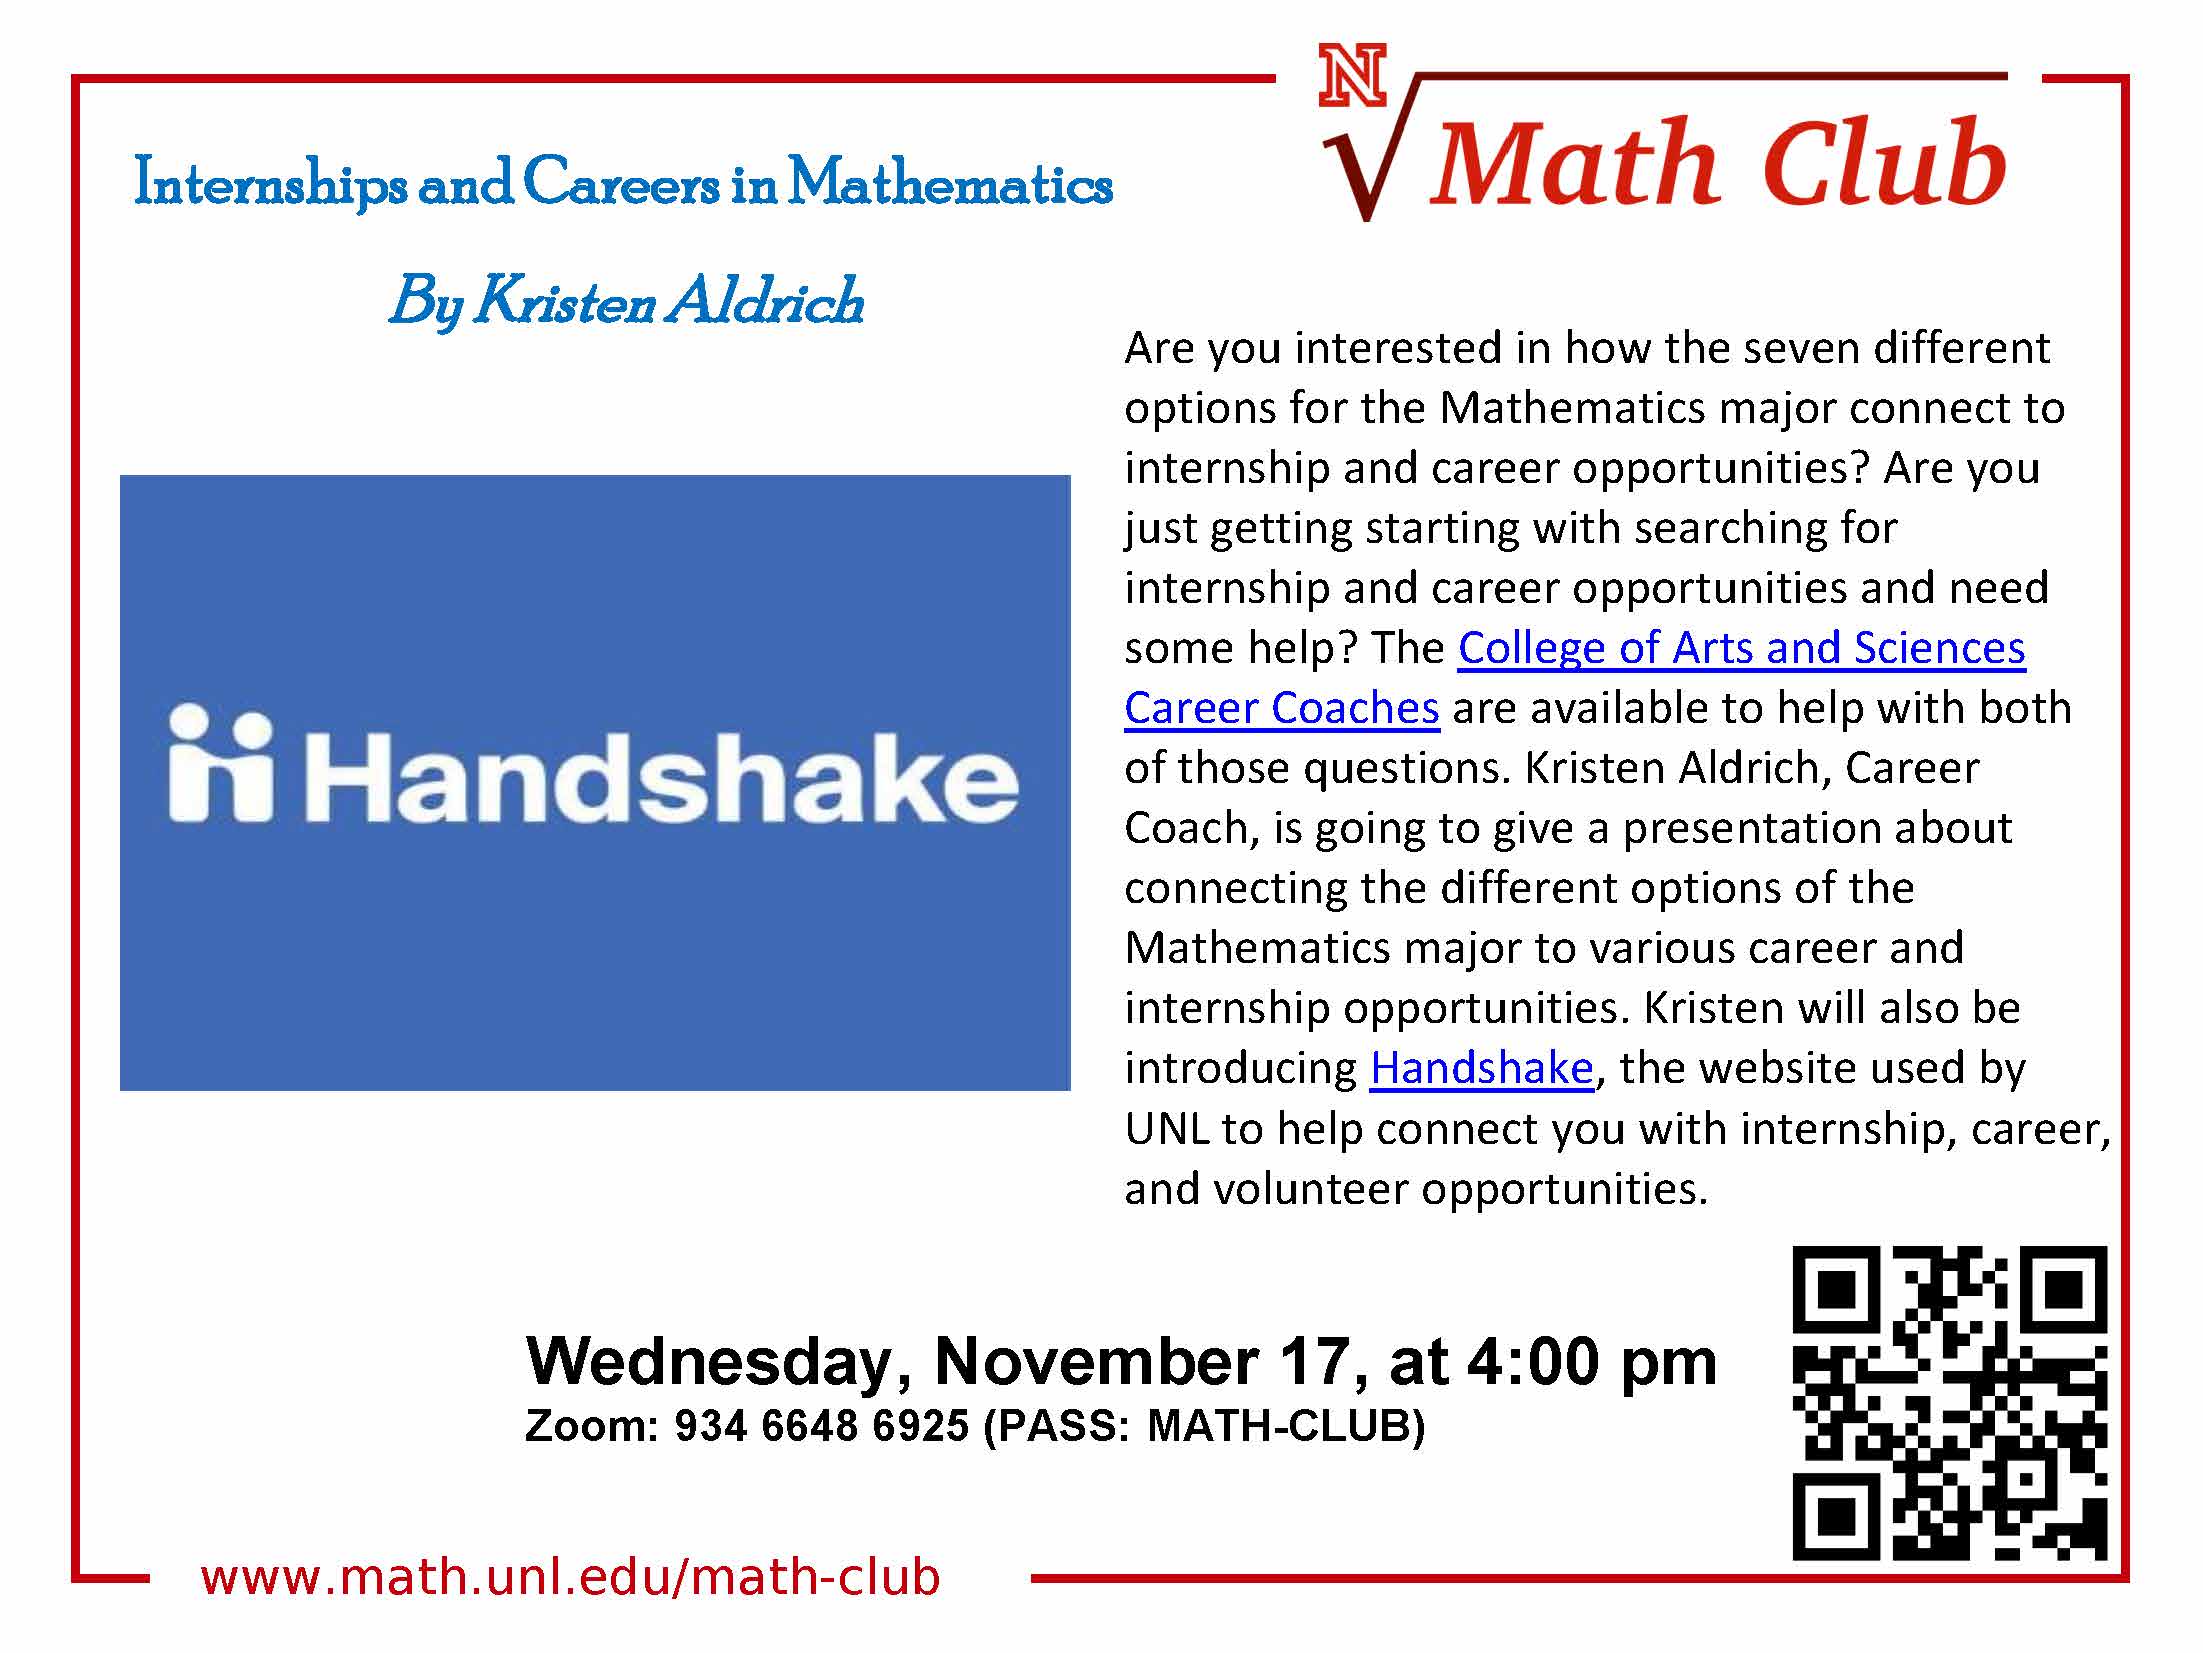 Math Club Internships and Careers in Mathematics Announce